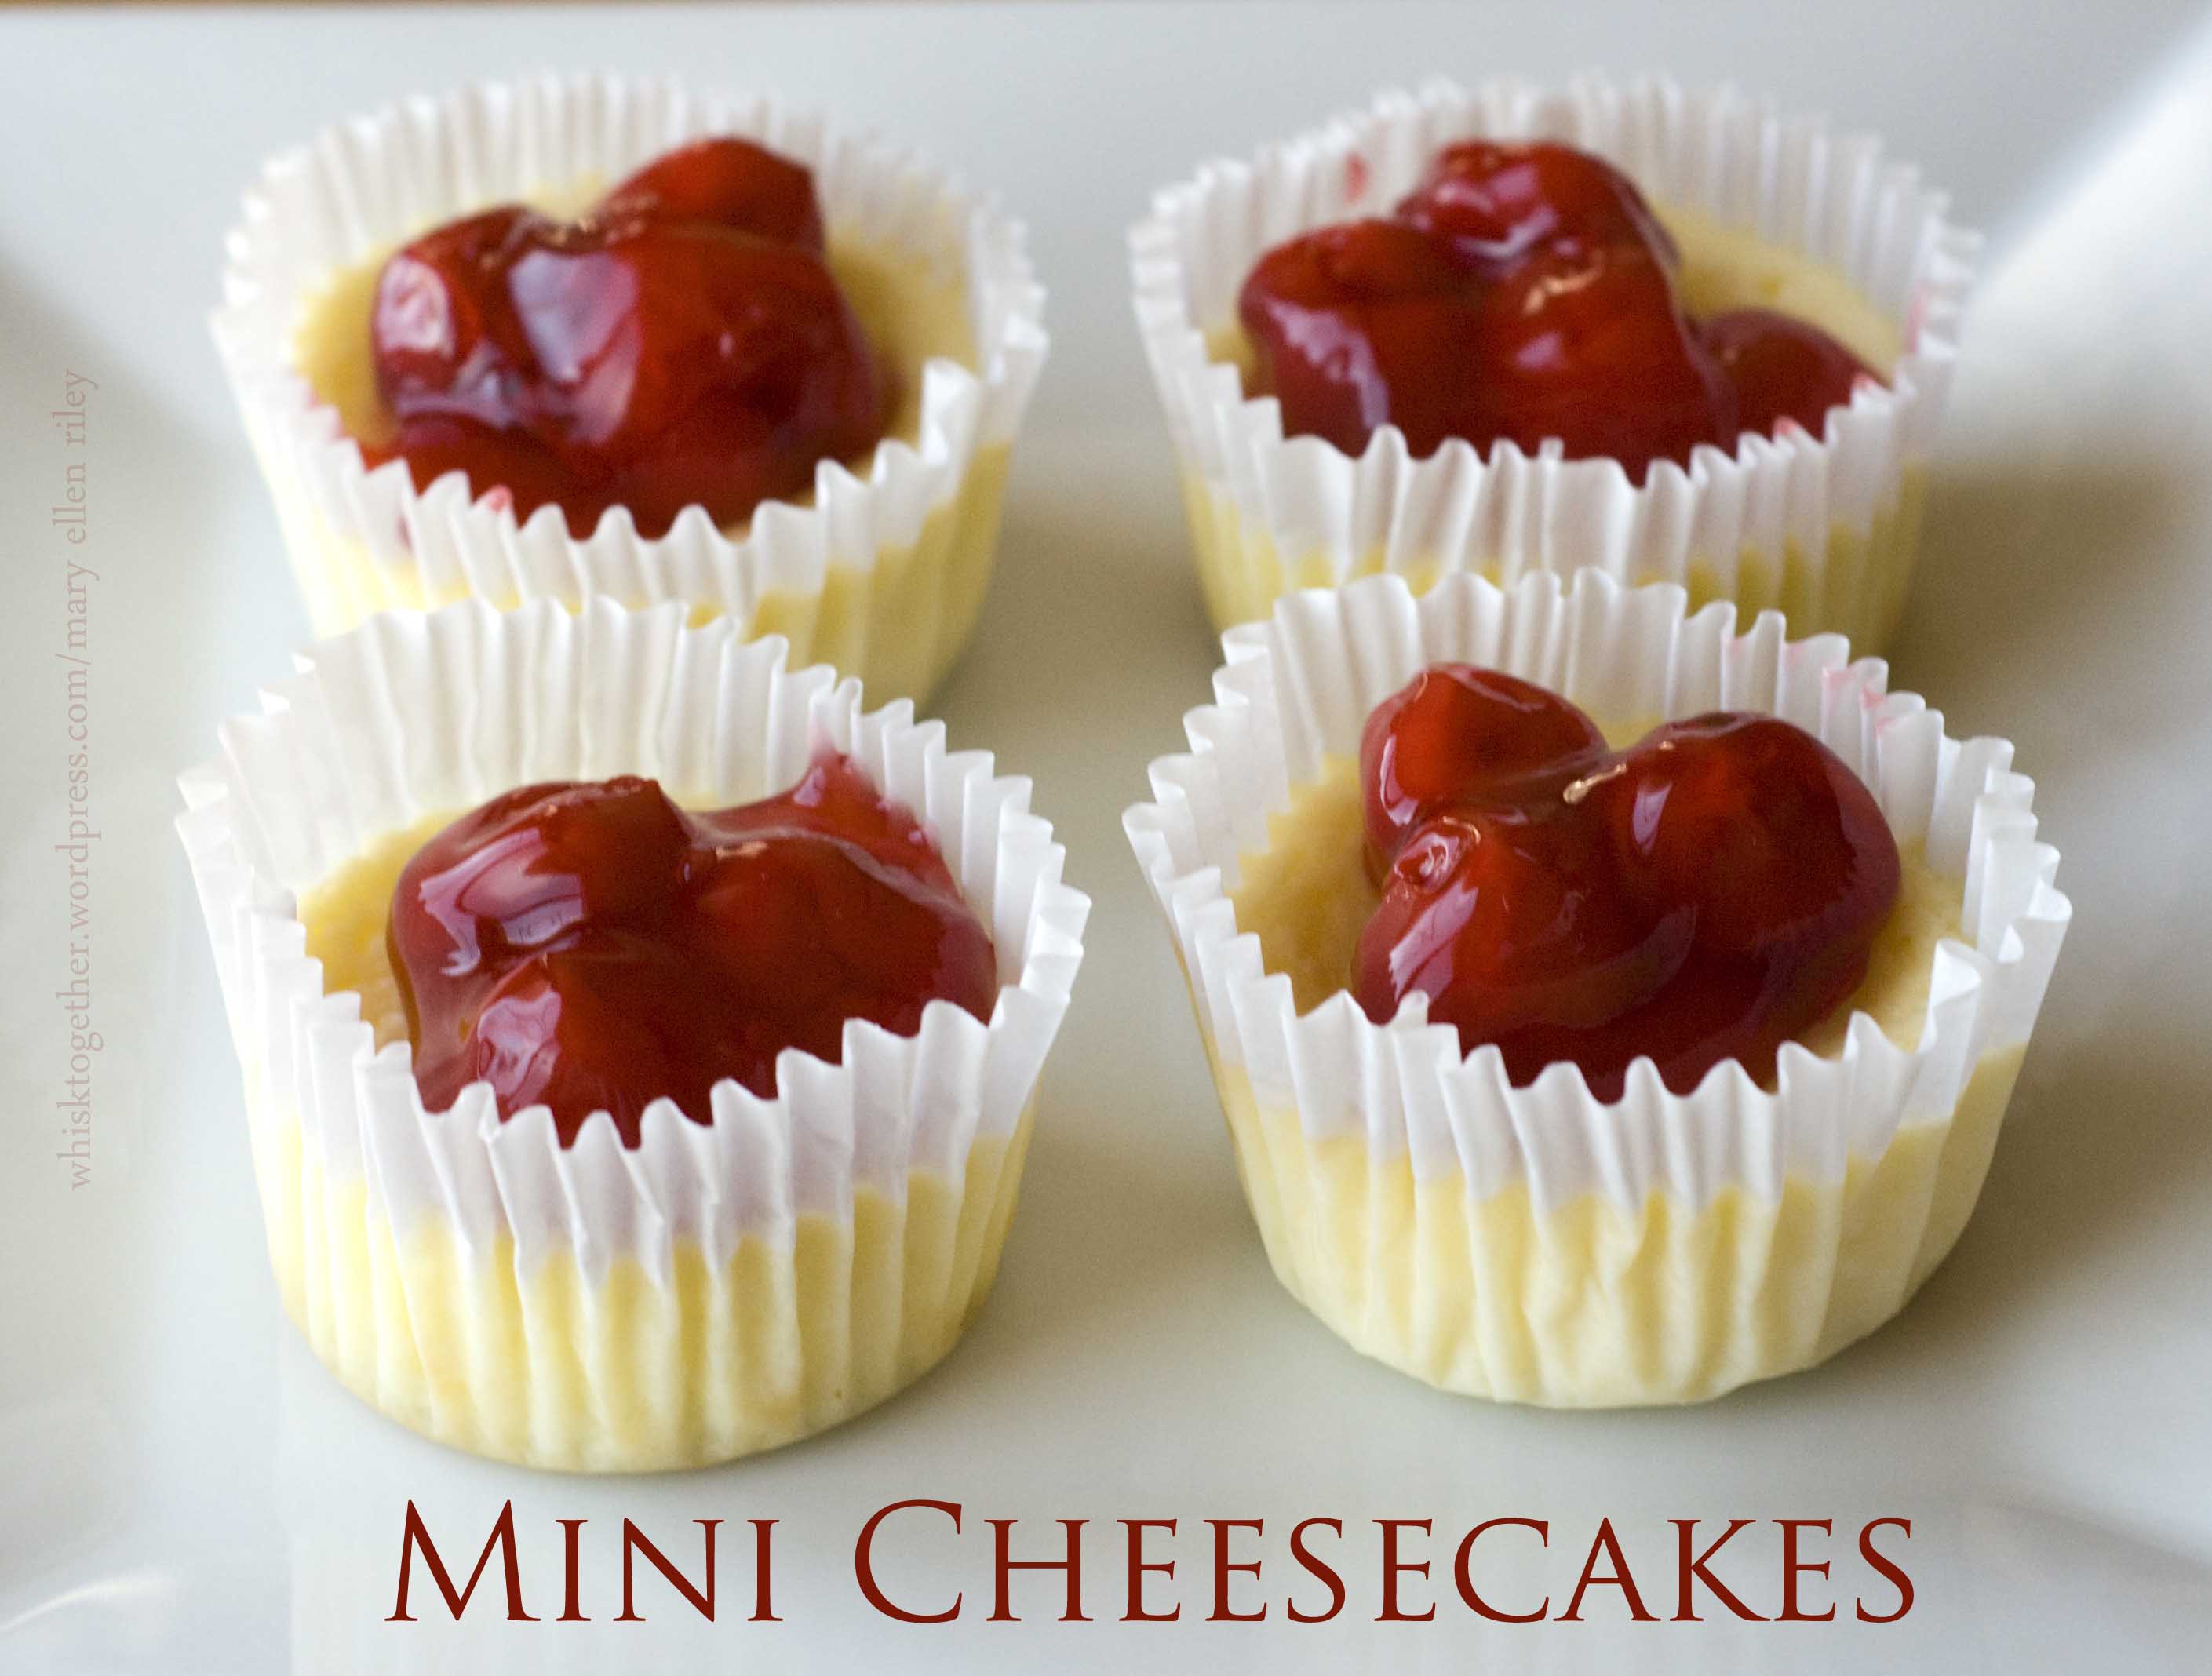 What are some recipes for vanilla wafer mini cheesecakes?